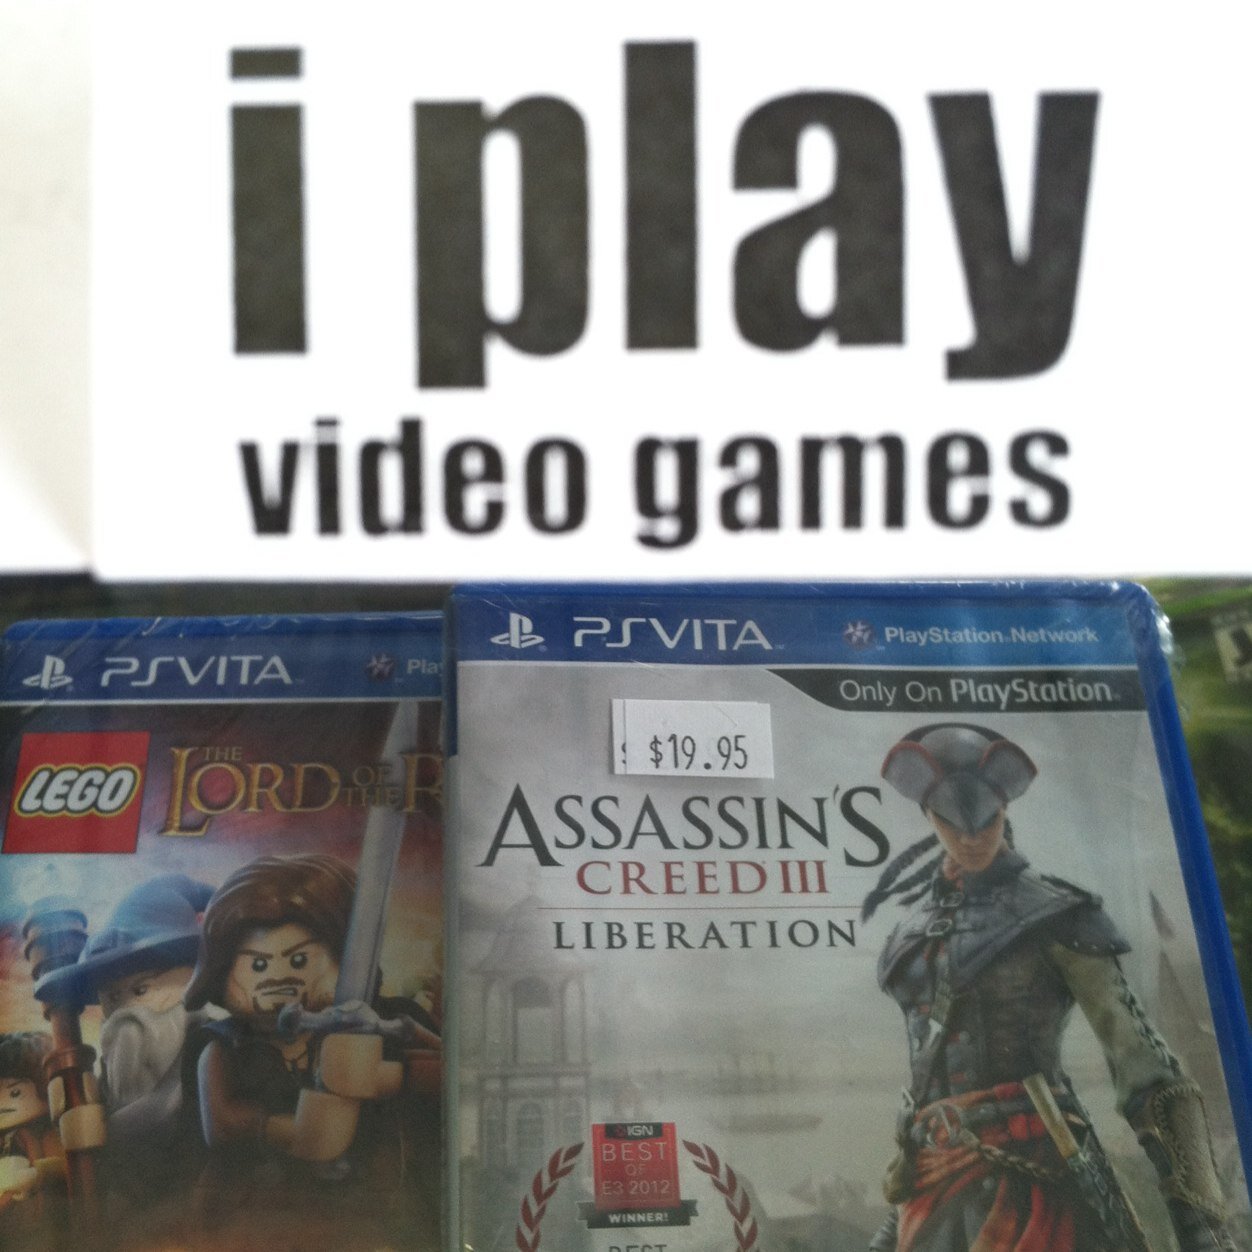 We buy, sell, and trade Video Games, DVDs, and Legos!